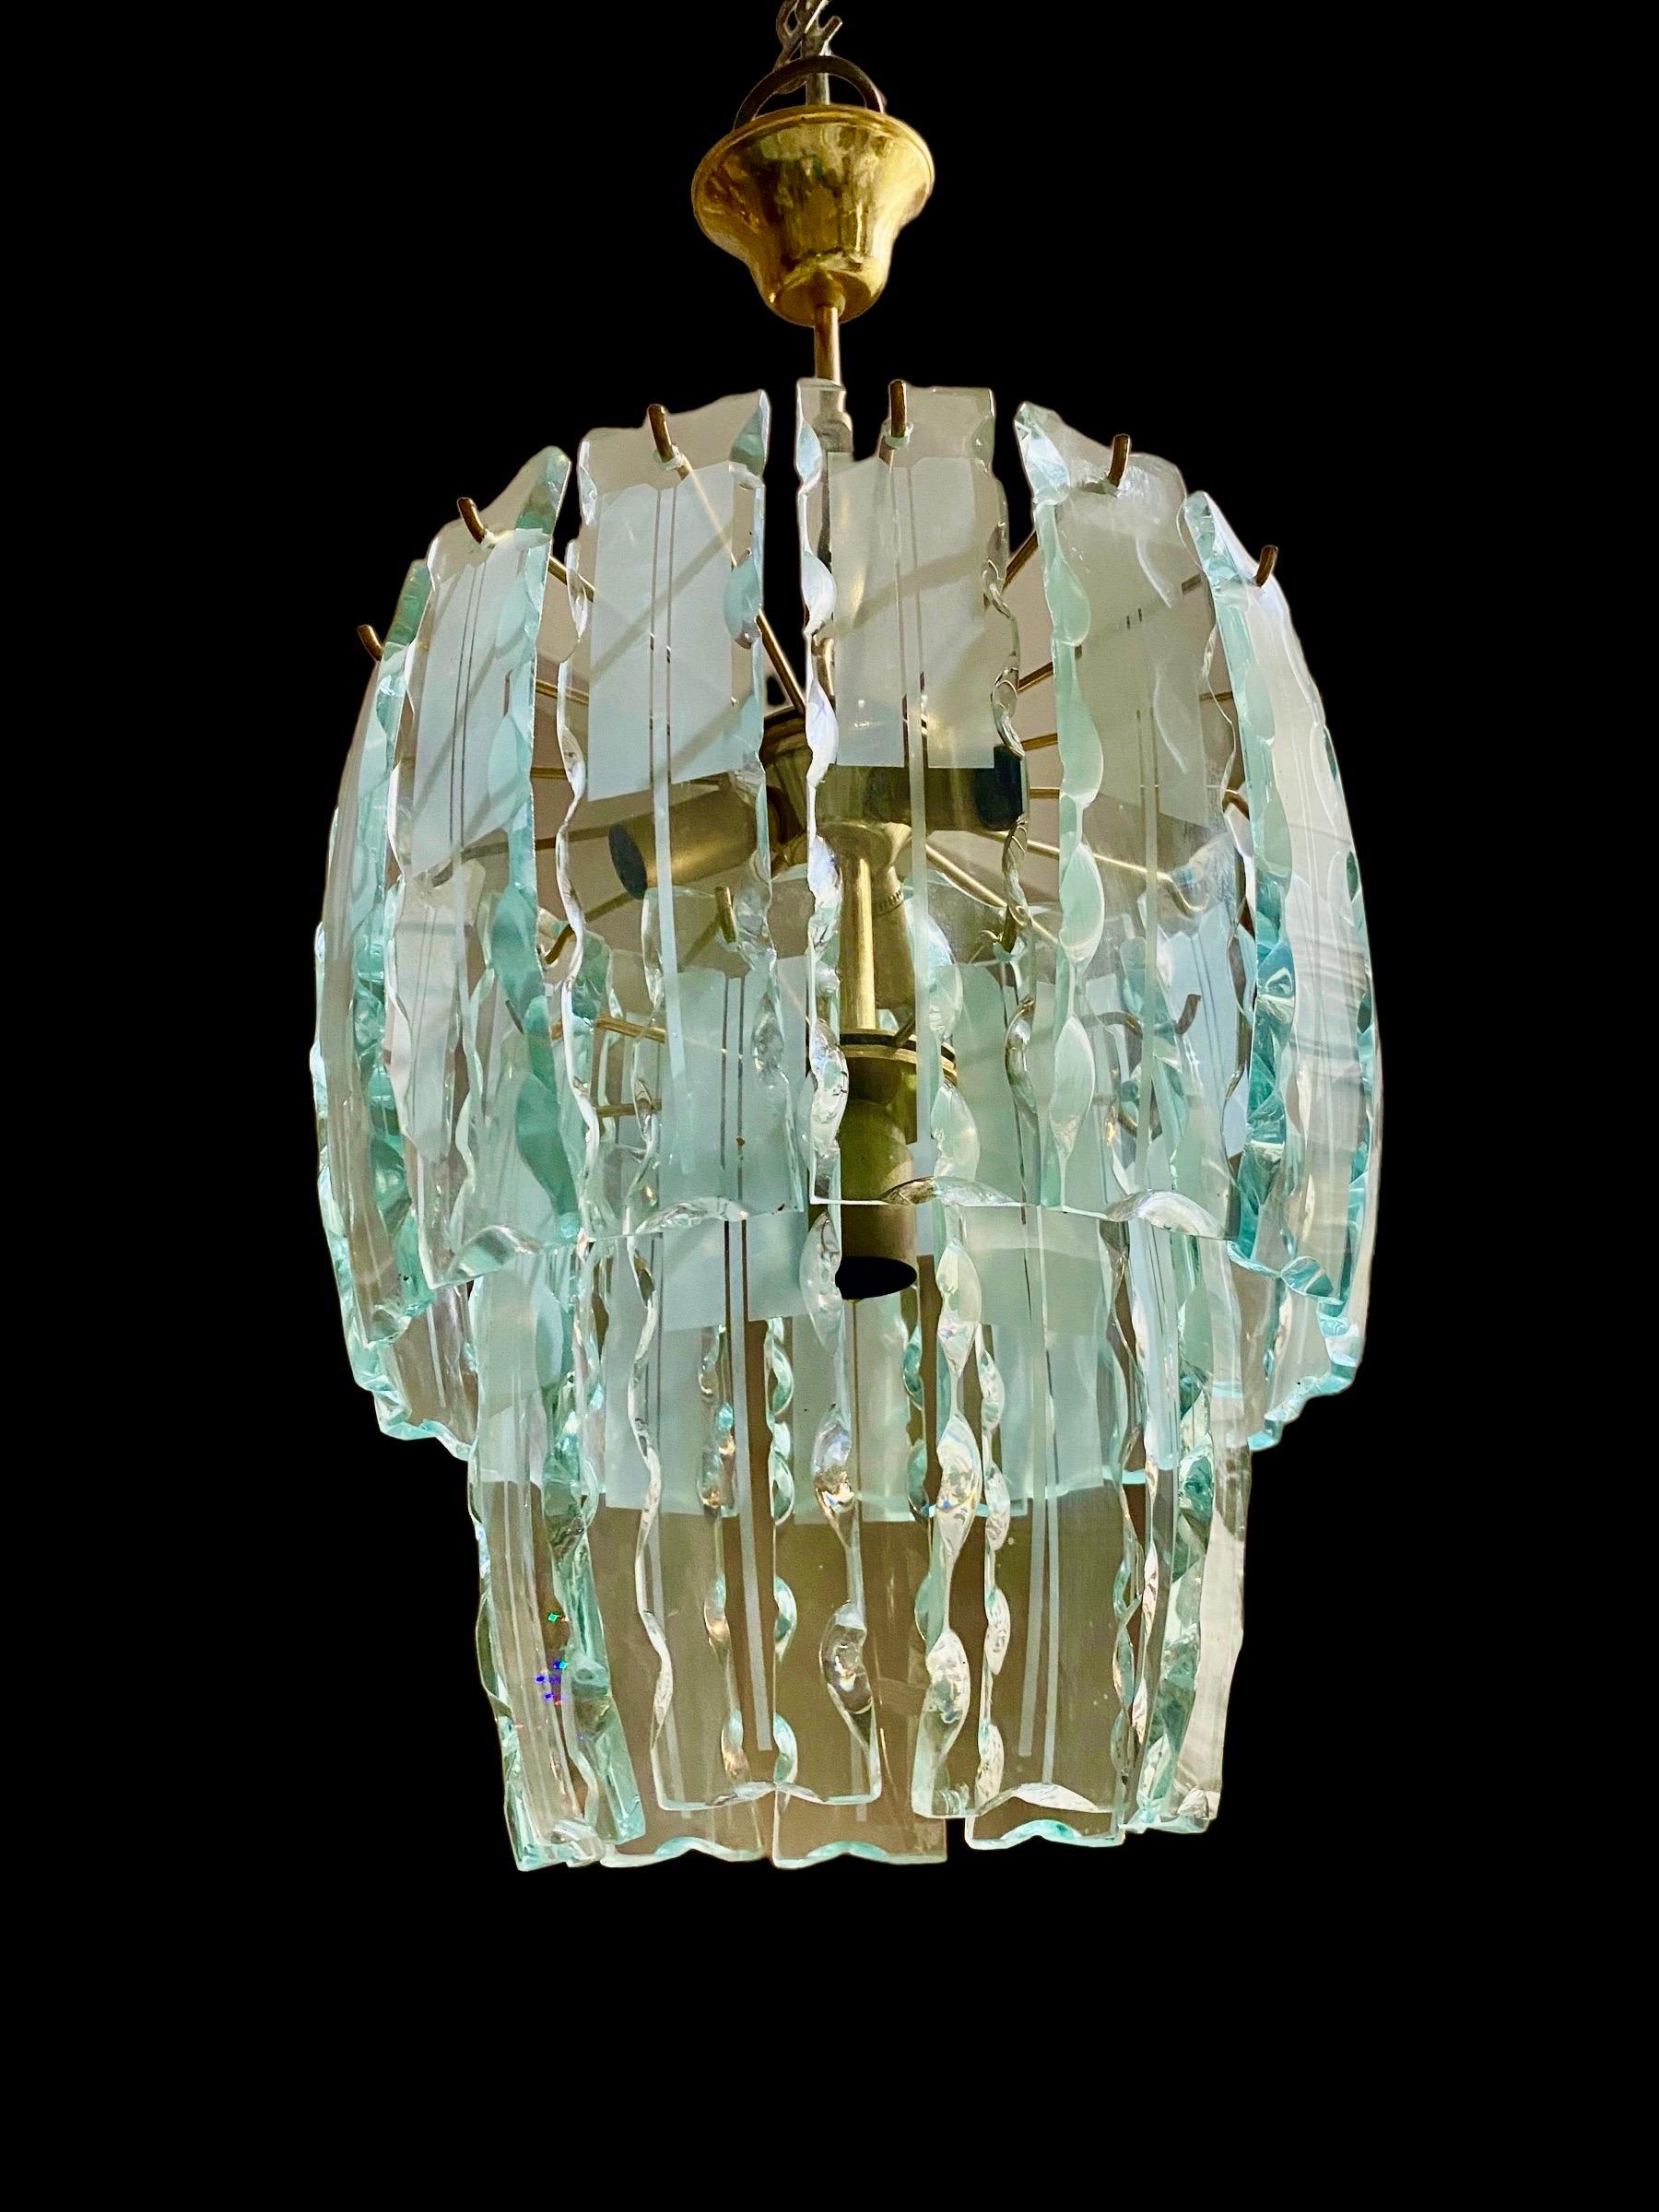 Zero Quattro glass chandelier, glass of murano in glass design. Very rare model of glass with frost finish brass structure. An iconic lamp of Italian design, a unique element for an atmosphere of great luxury .

DISCOUNT shipping for US cintinantal